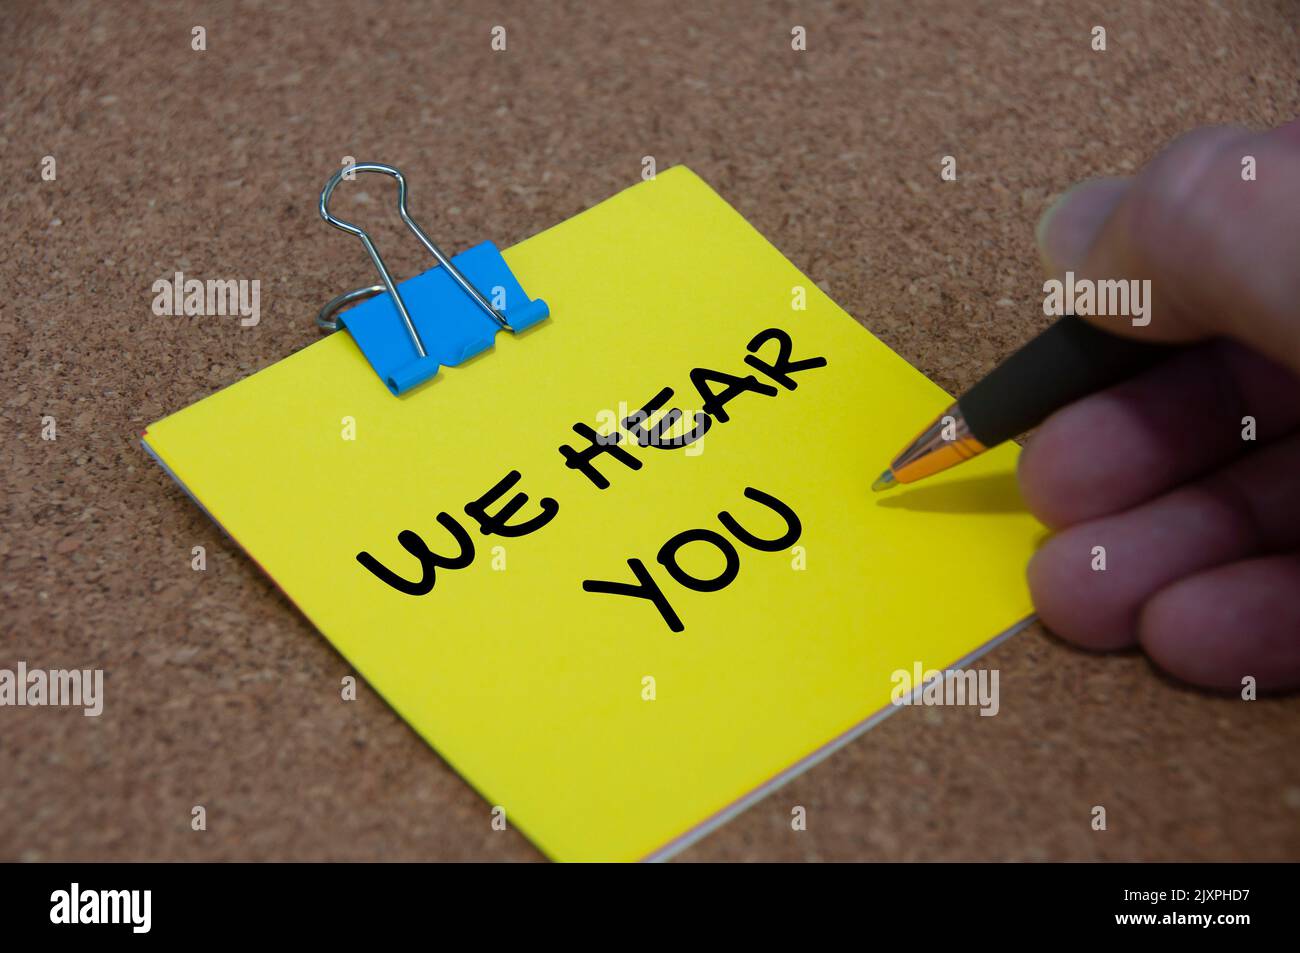 we hear you text on yellow noted. Listening concept. Stock Photo